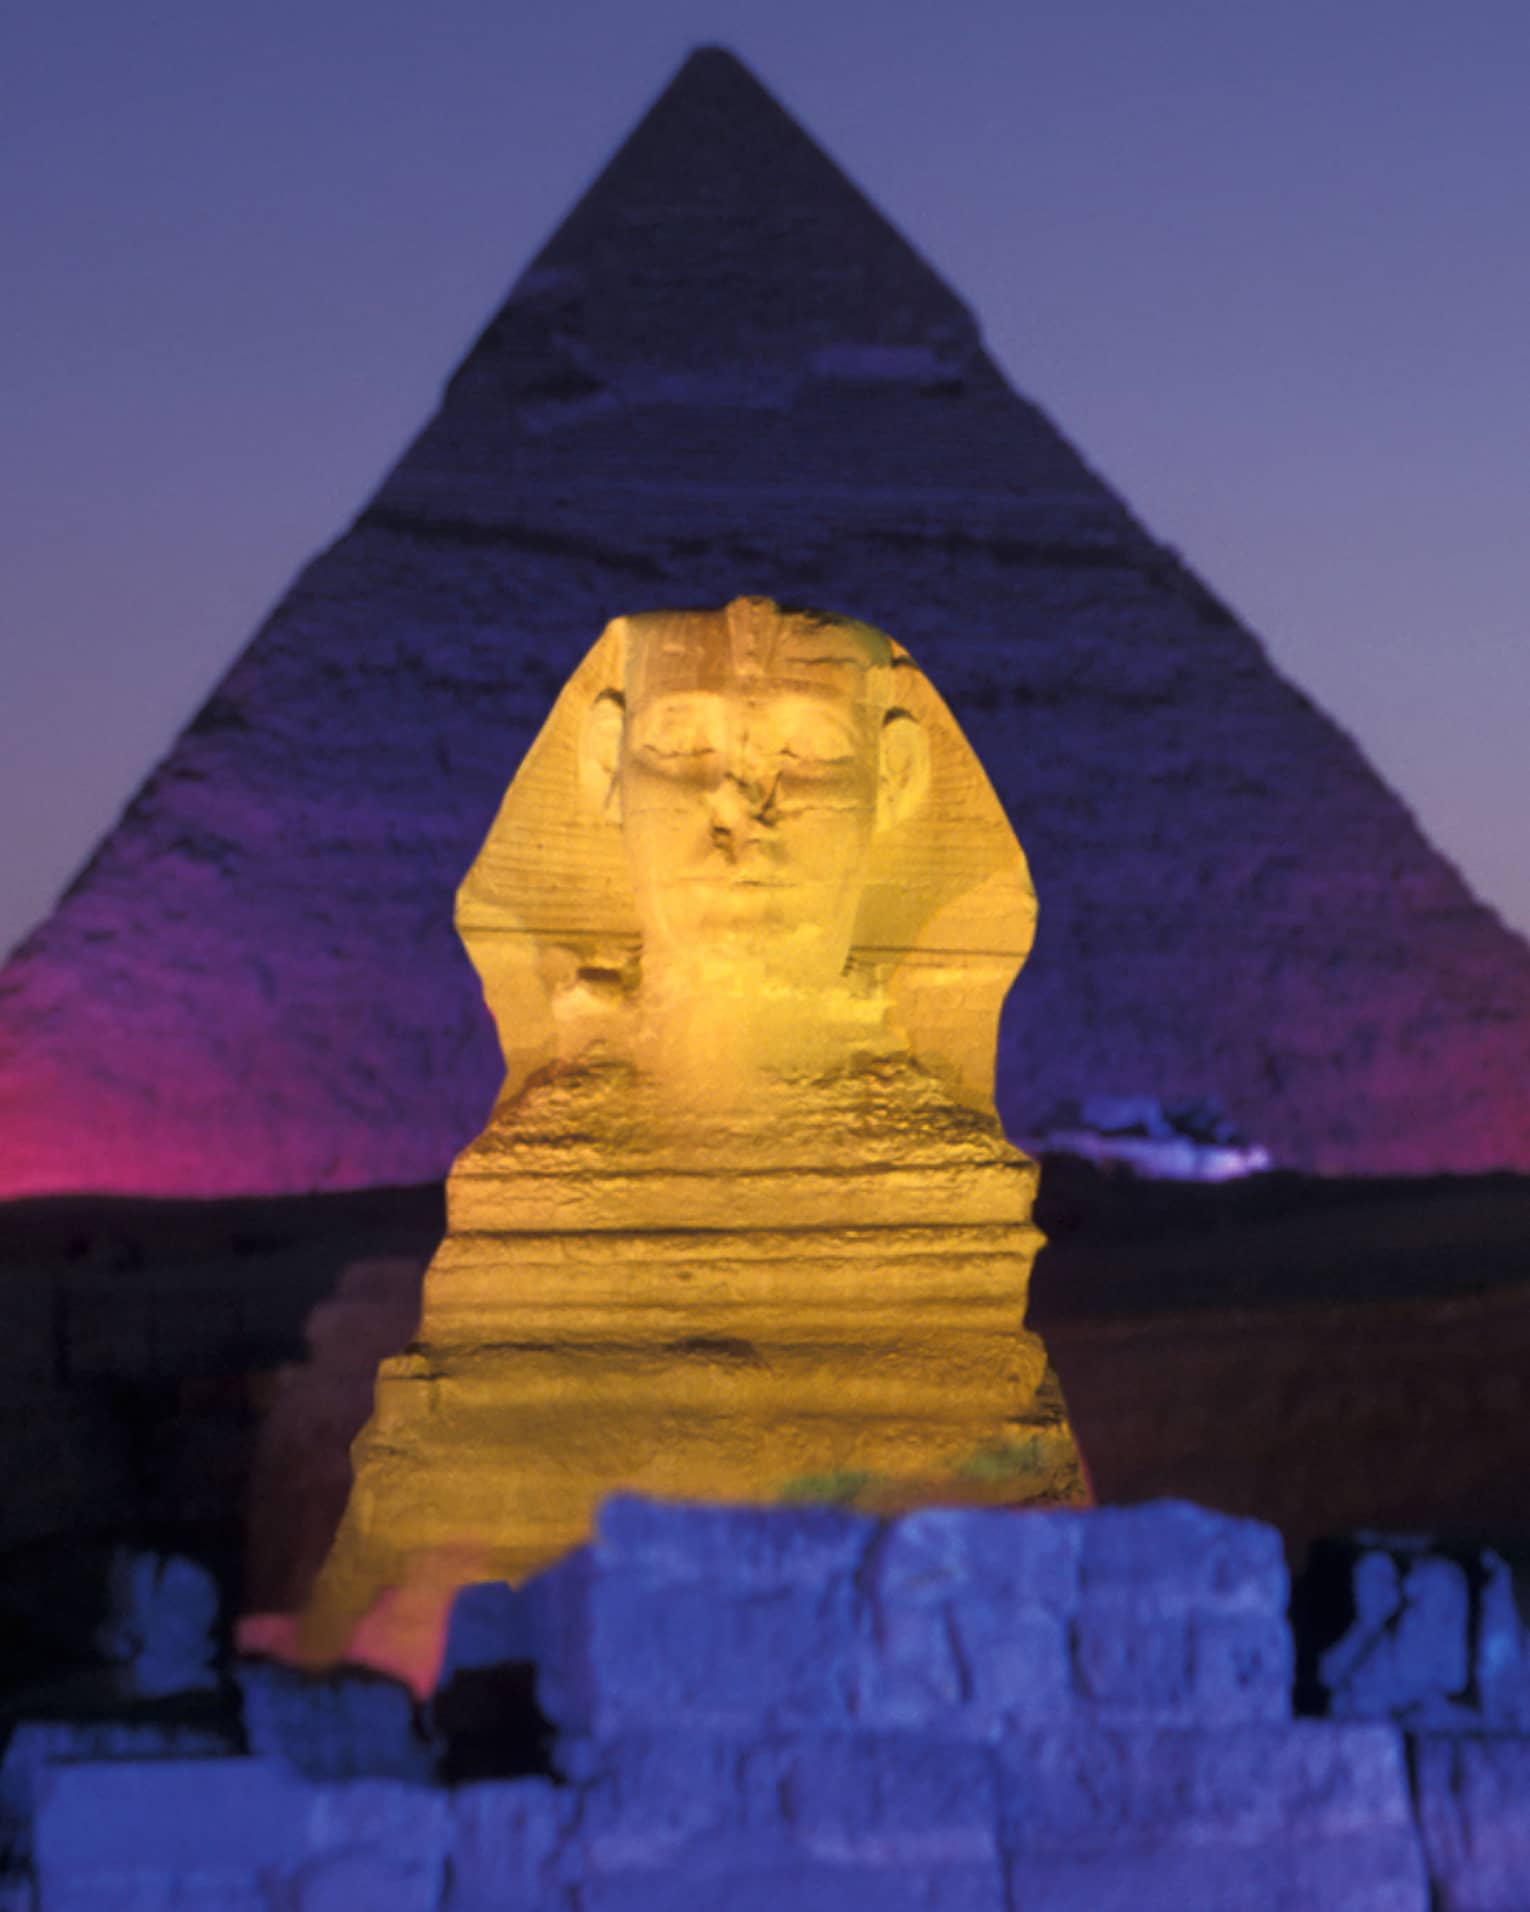 Night view of Pyramids of Giza and Great Sphinx illuminated